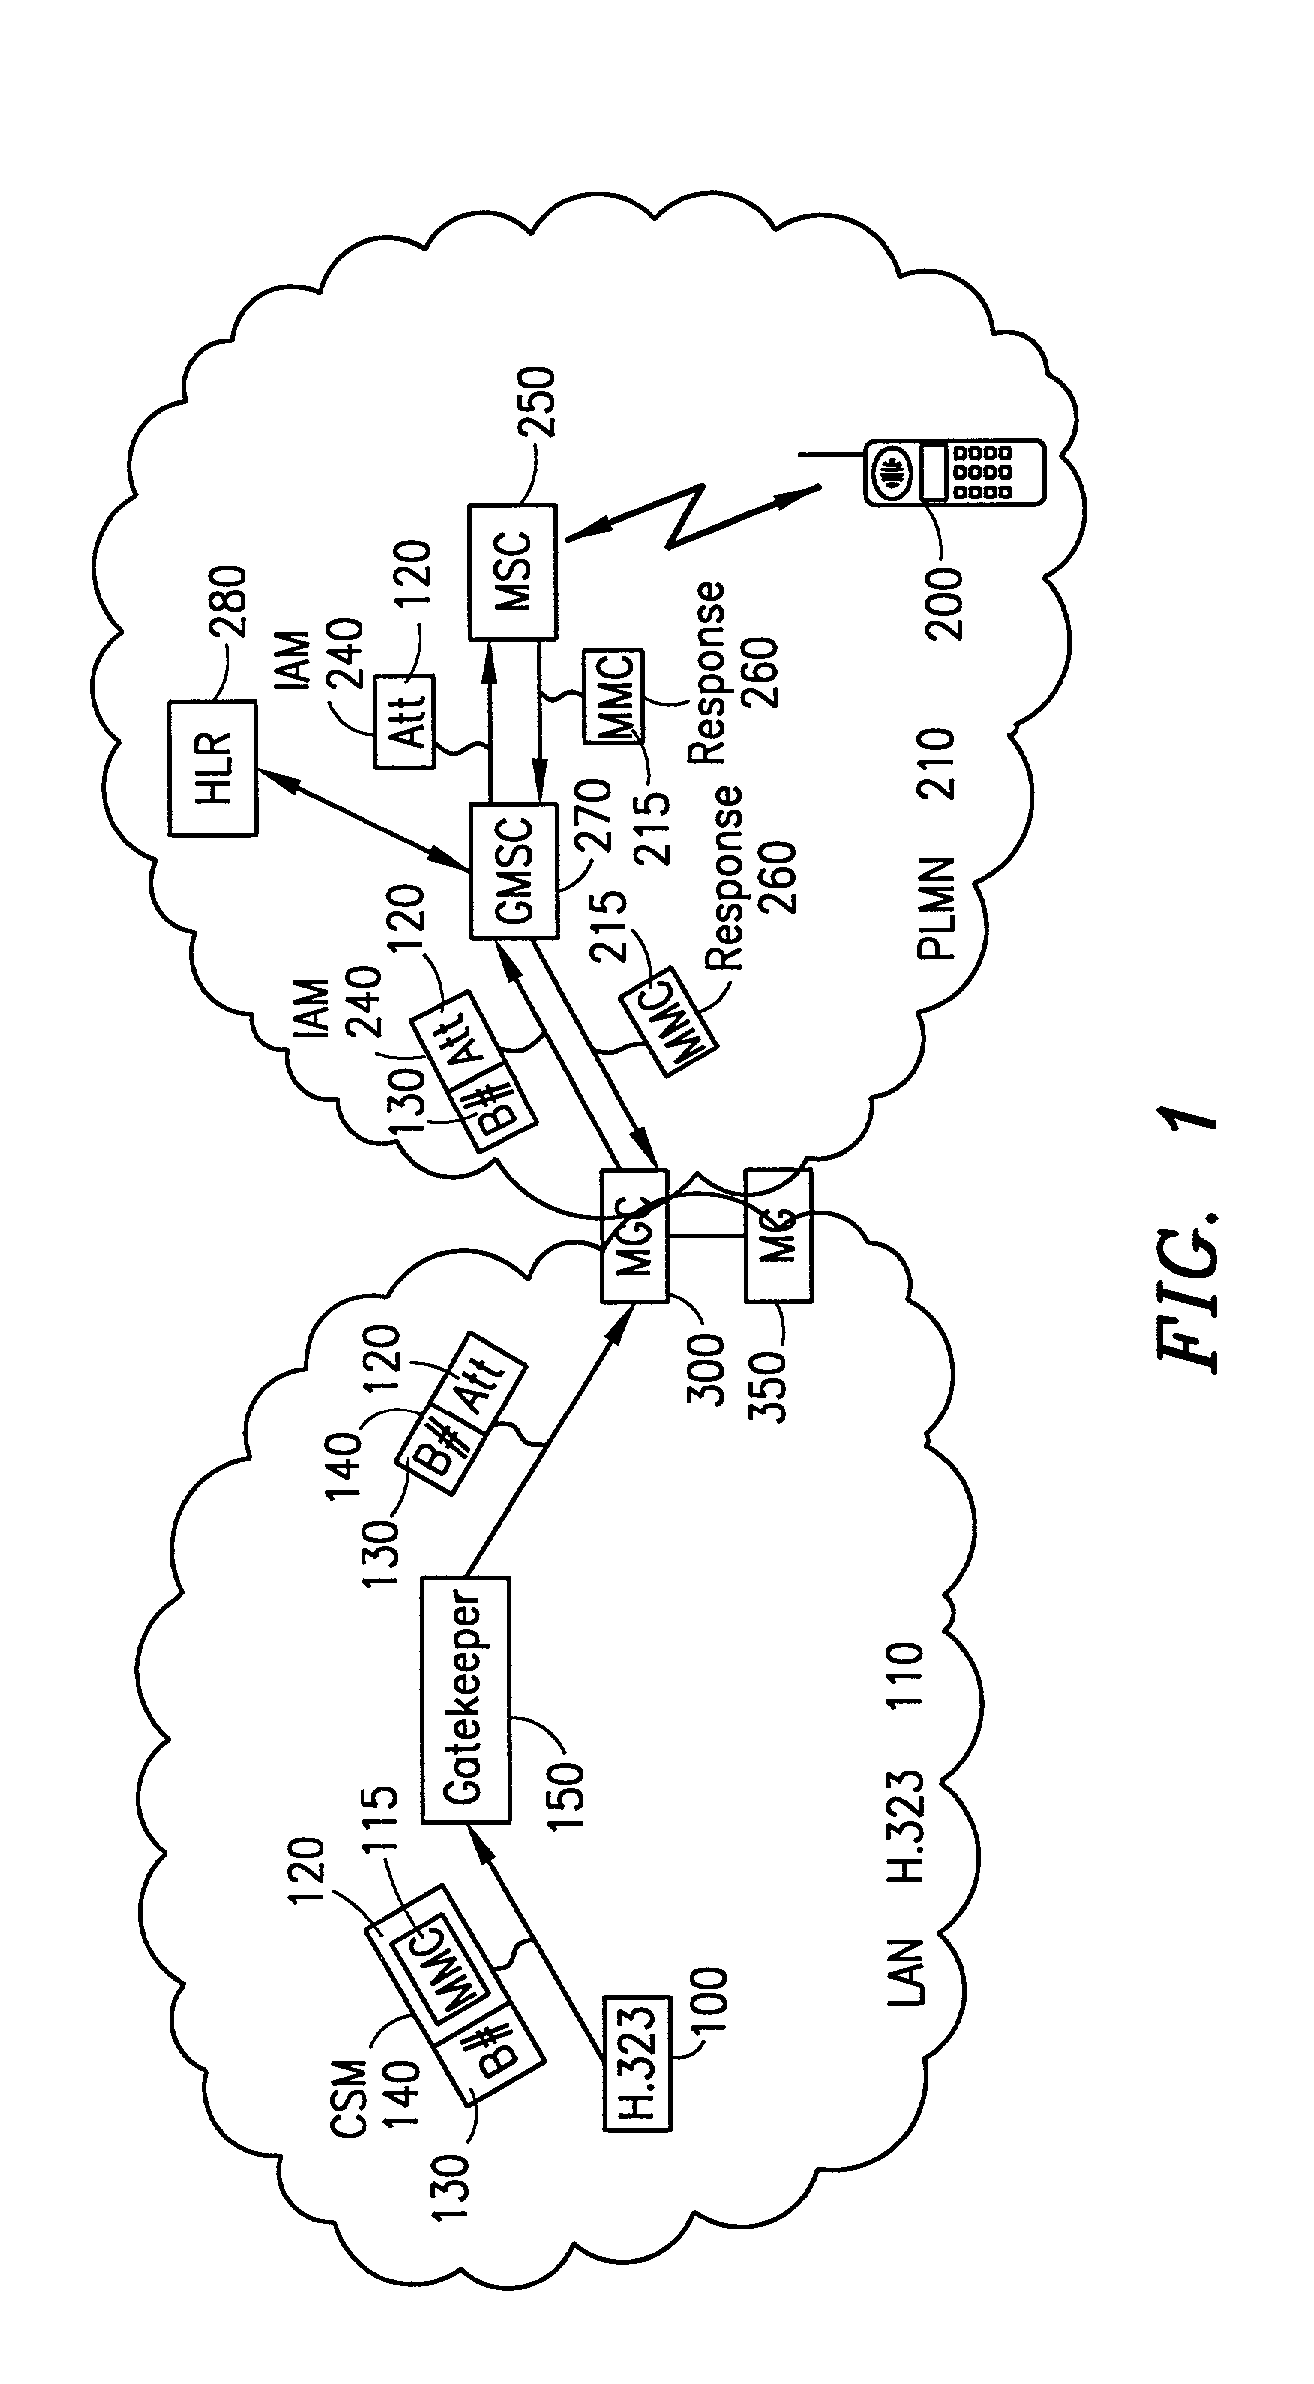 System and method for negotiation of multi-media capabilities across networks